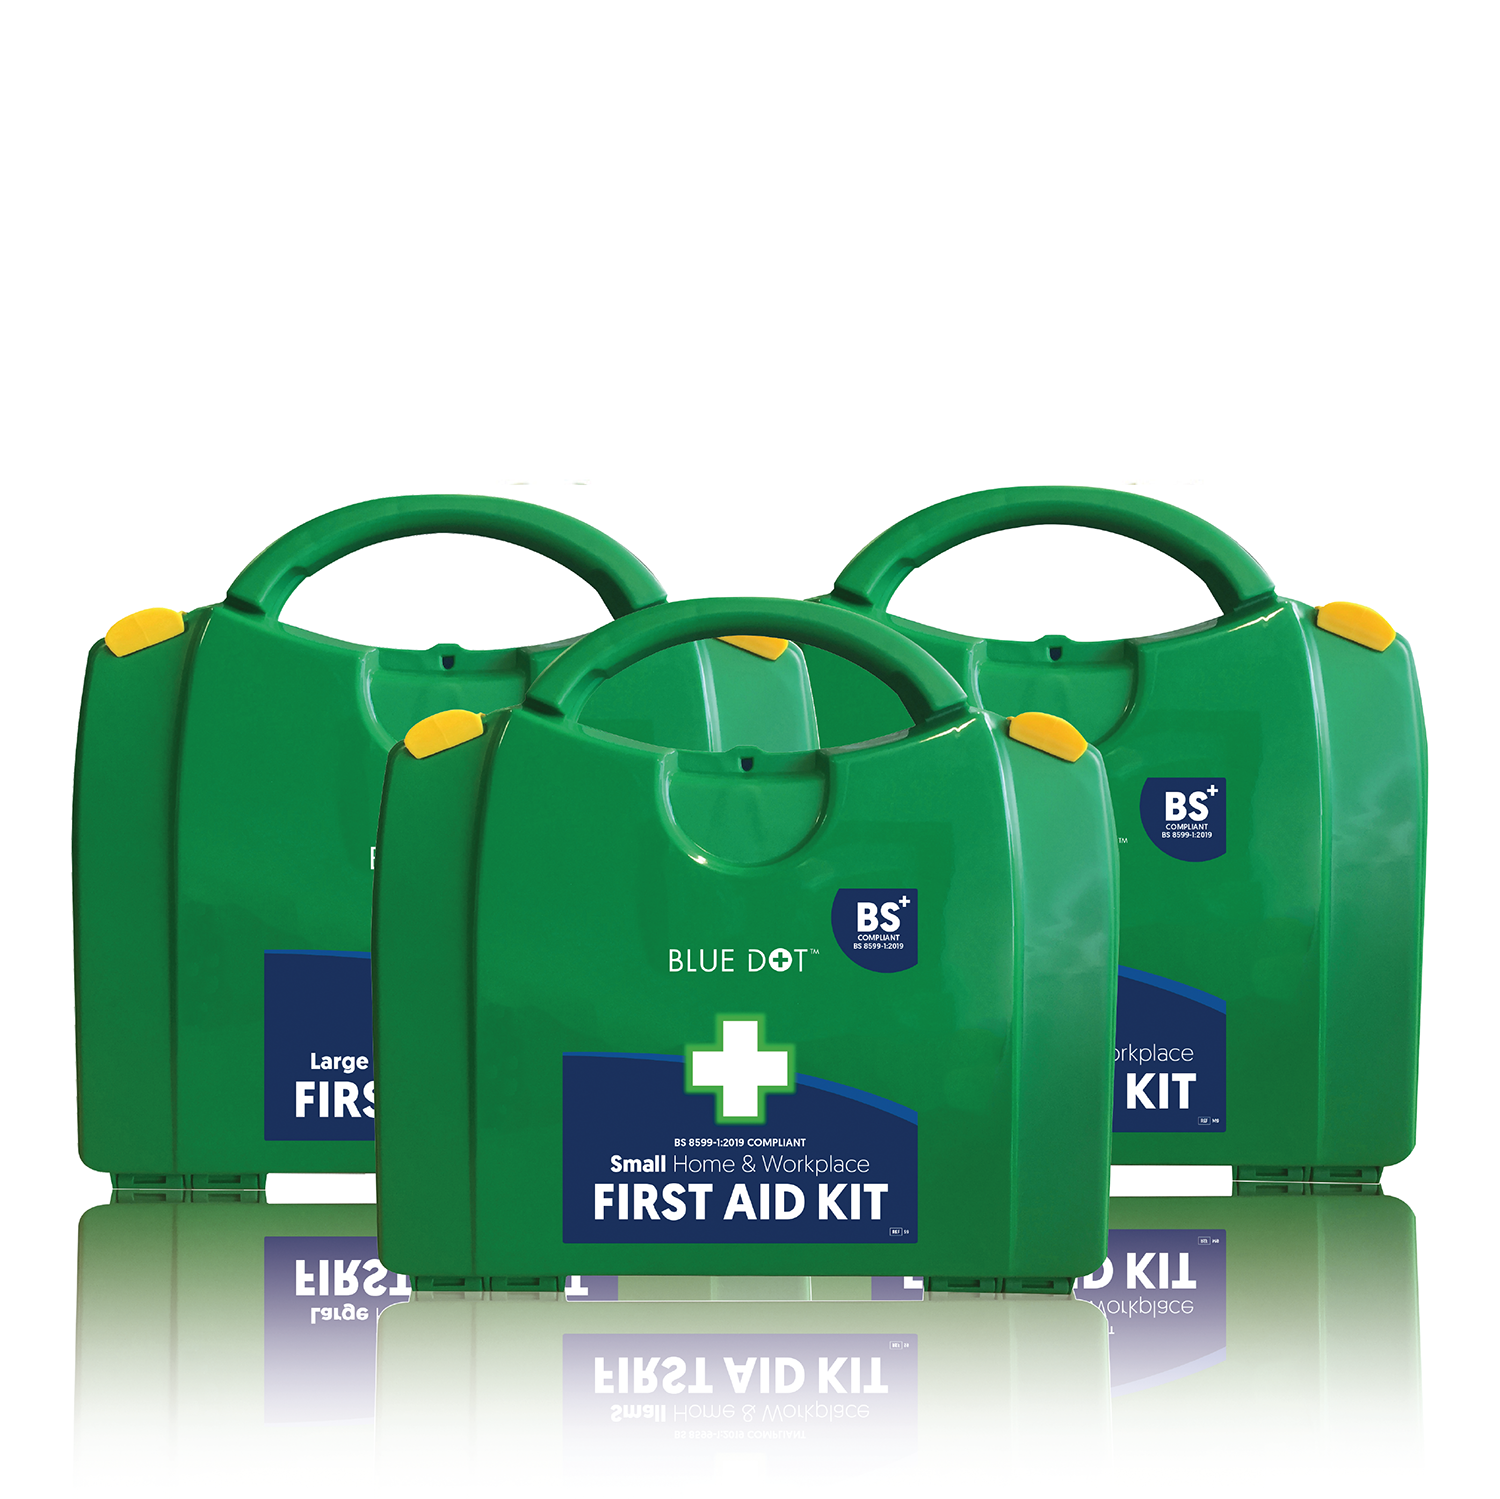 Blue Dot Home & Workplace First Aid Kit BS 8599-1 (2019) | Large | Single